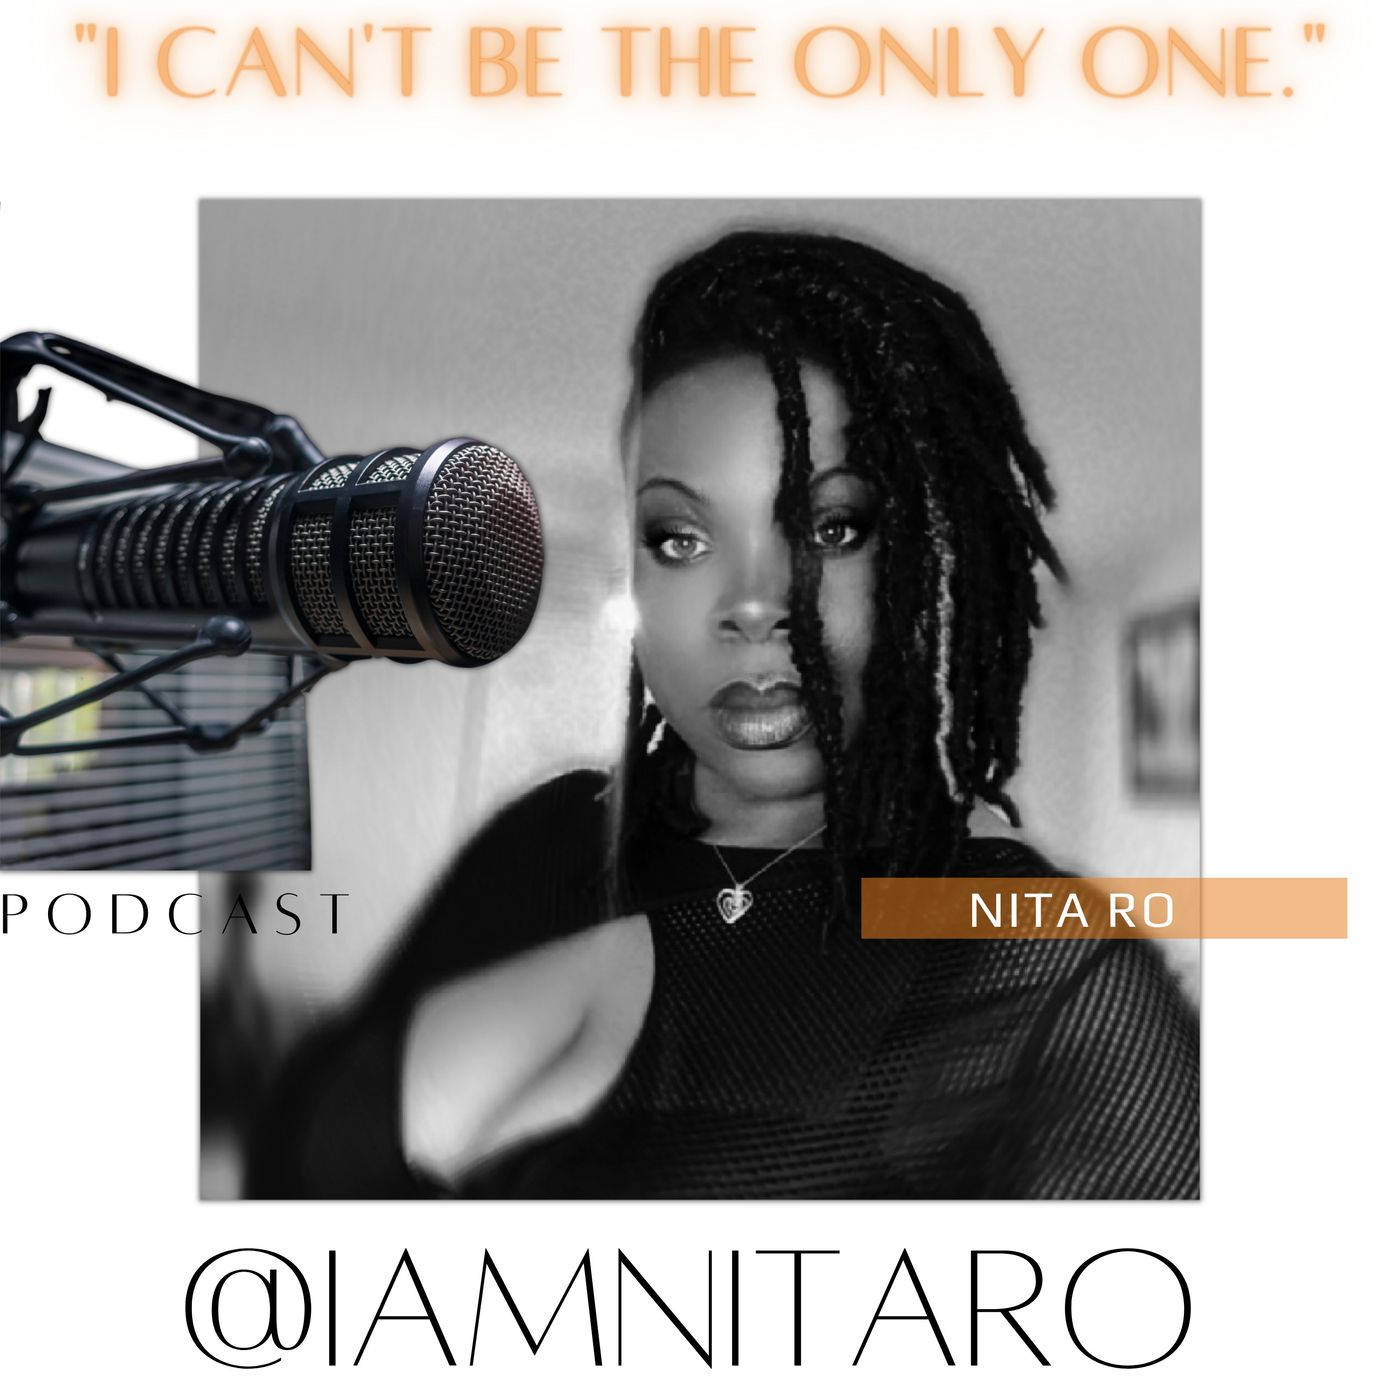 “I Can’t Be The Only One.” Podcast